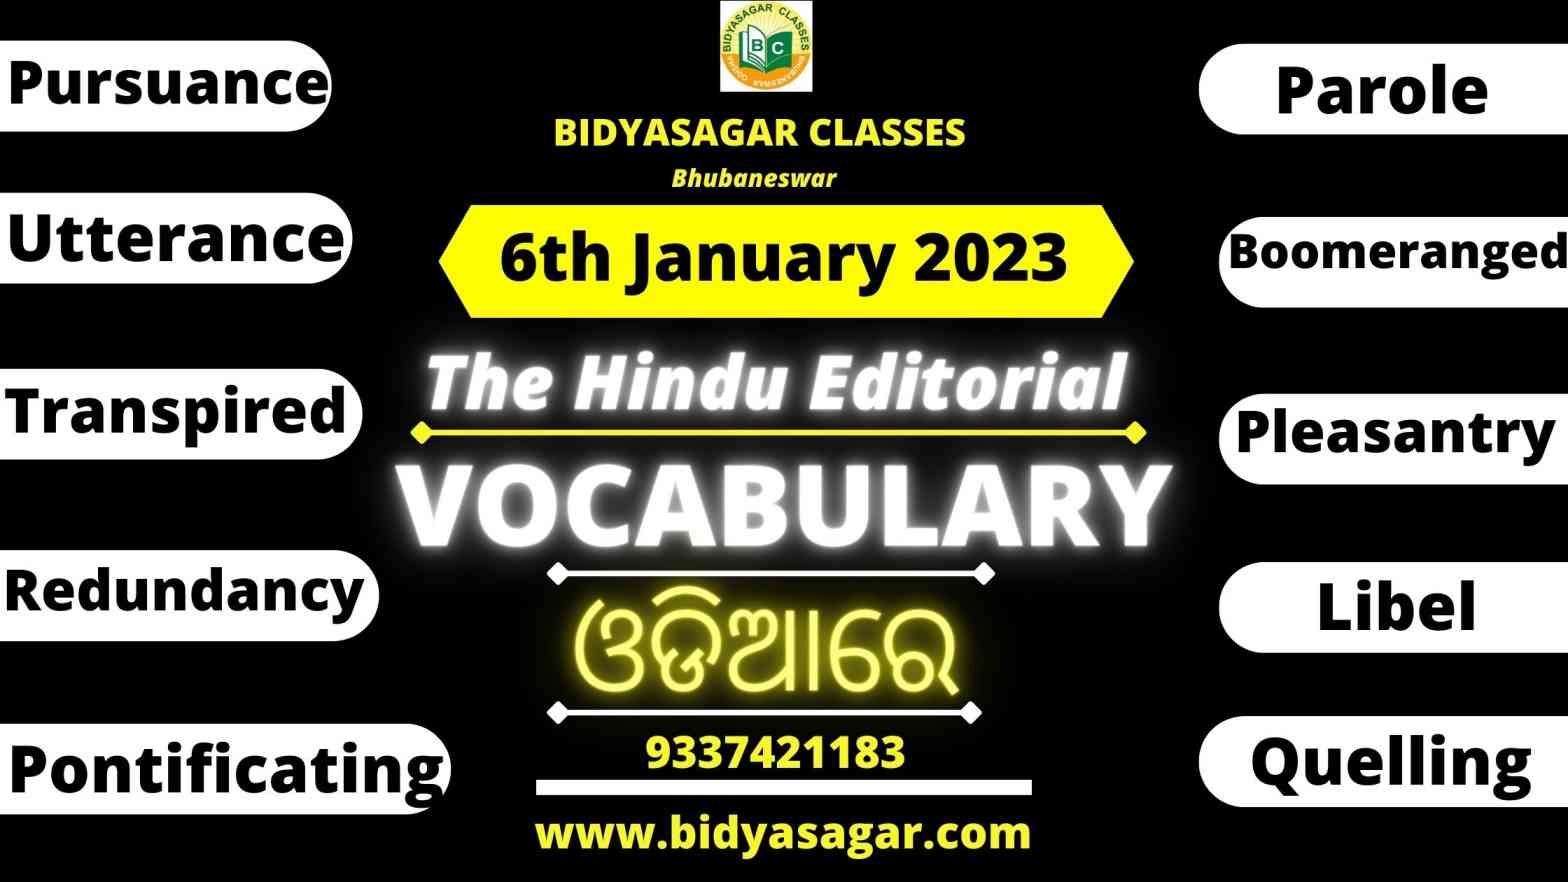 The Hindu Editorial Vocabulary of 6th January 2023